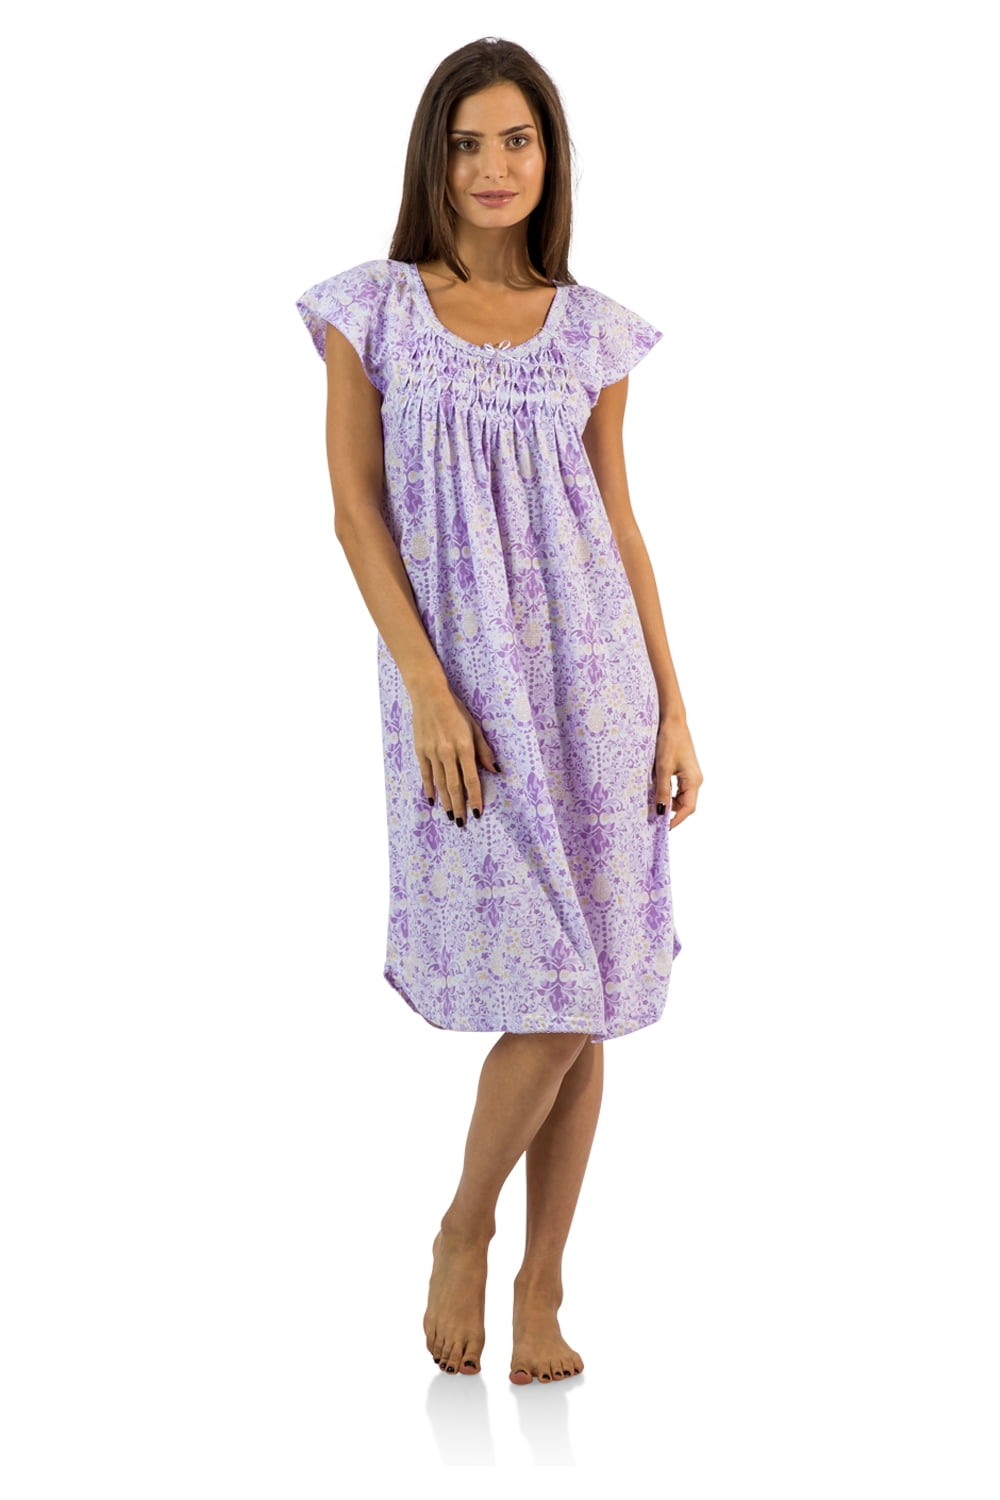 Casual Nights Women's Smocked Lace Short Sleeve Nightgown Purple 4X